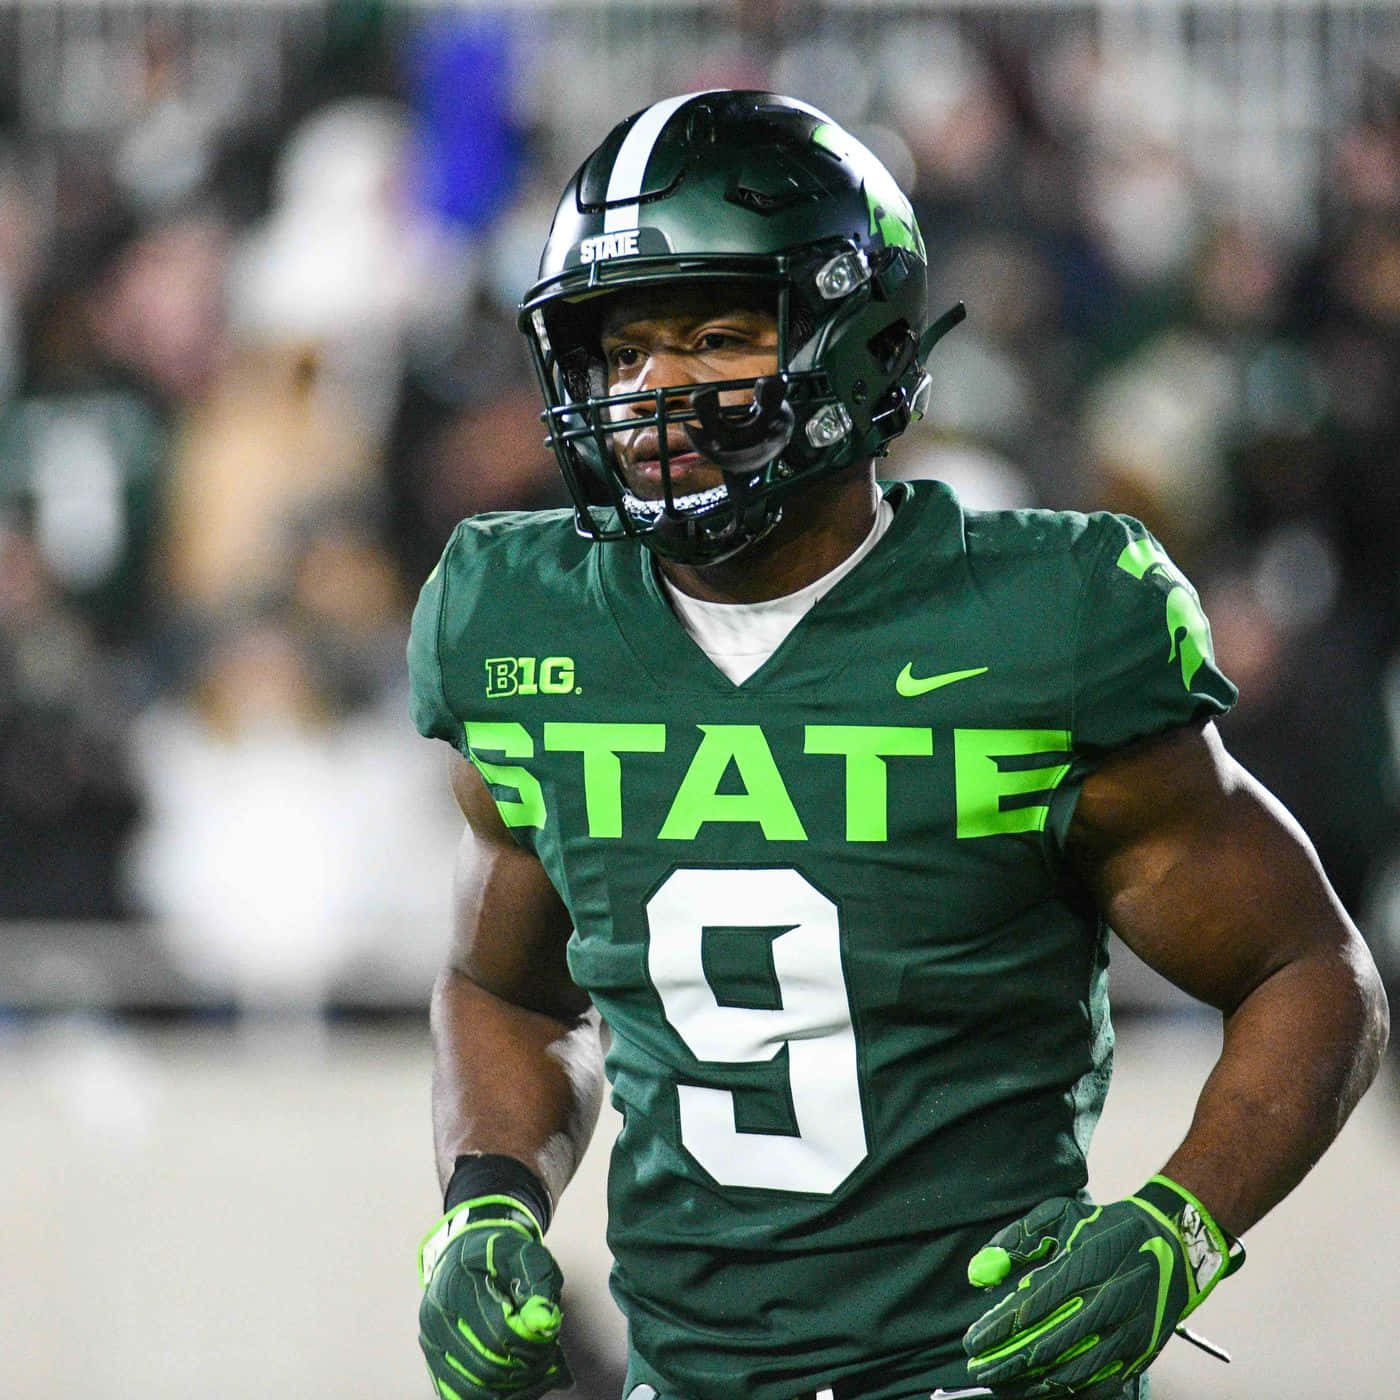 Michigan State Football Player Number9 Wallpaper